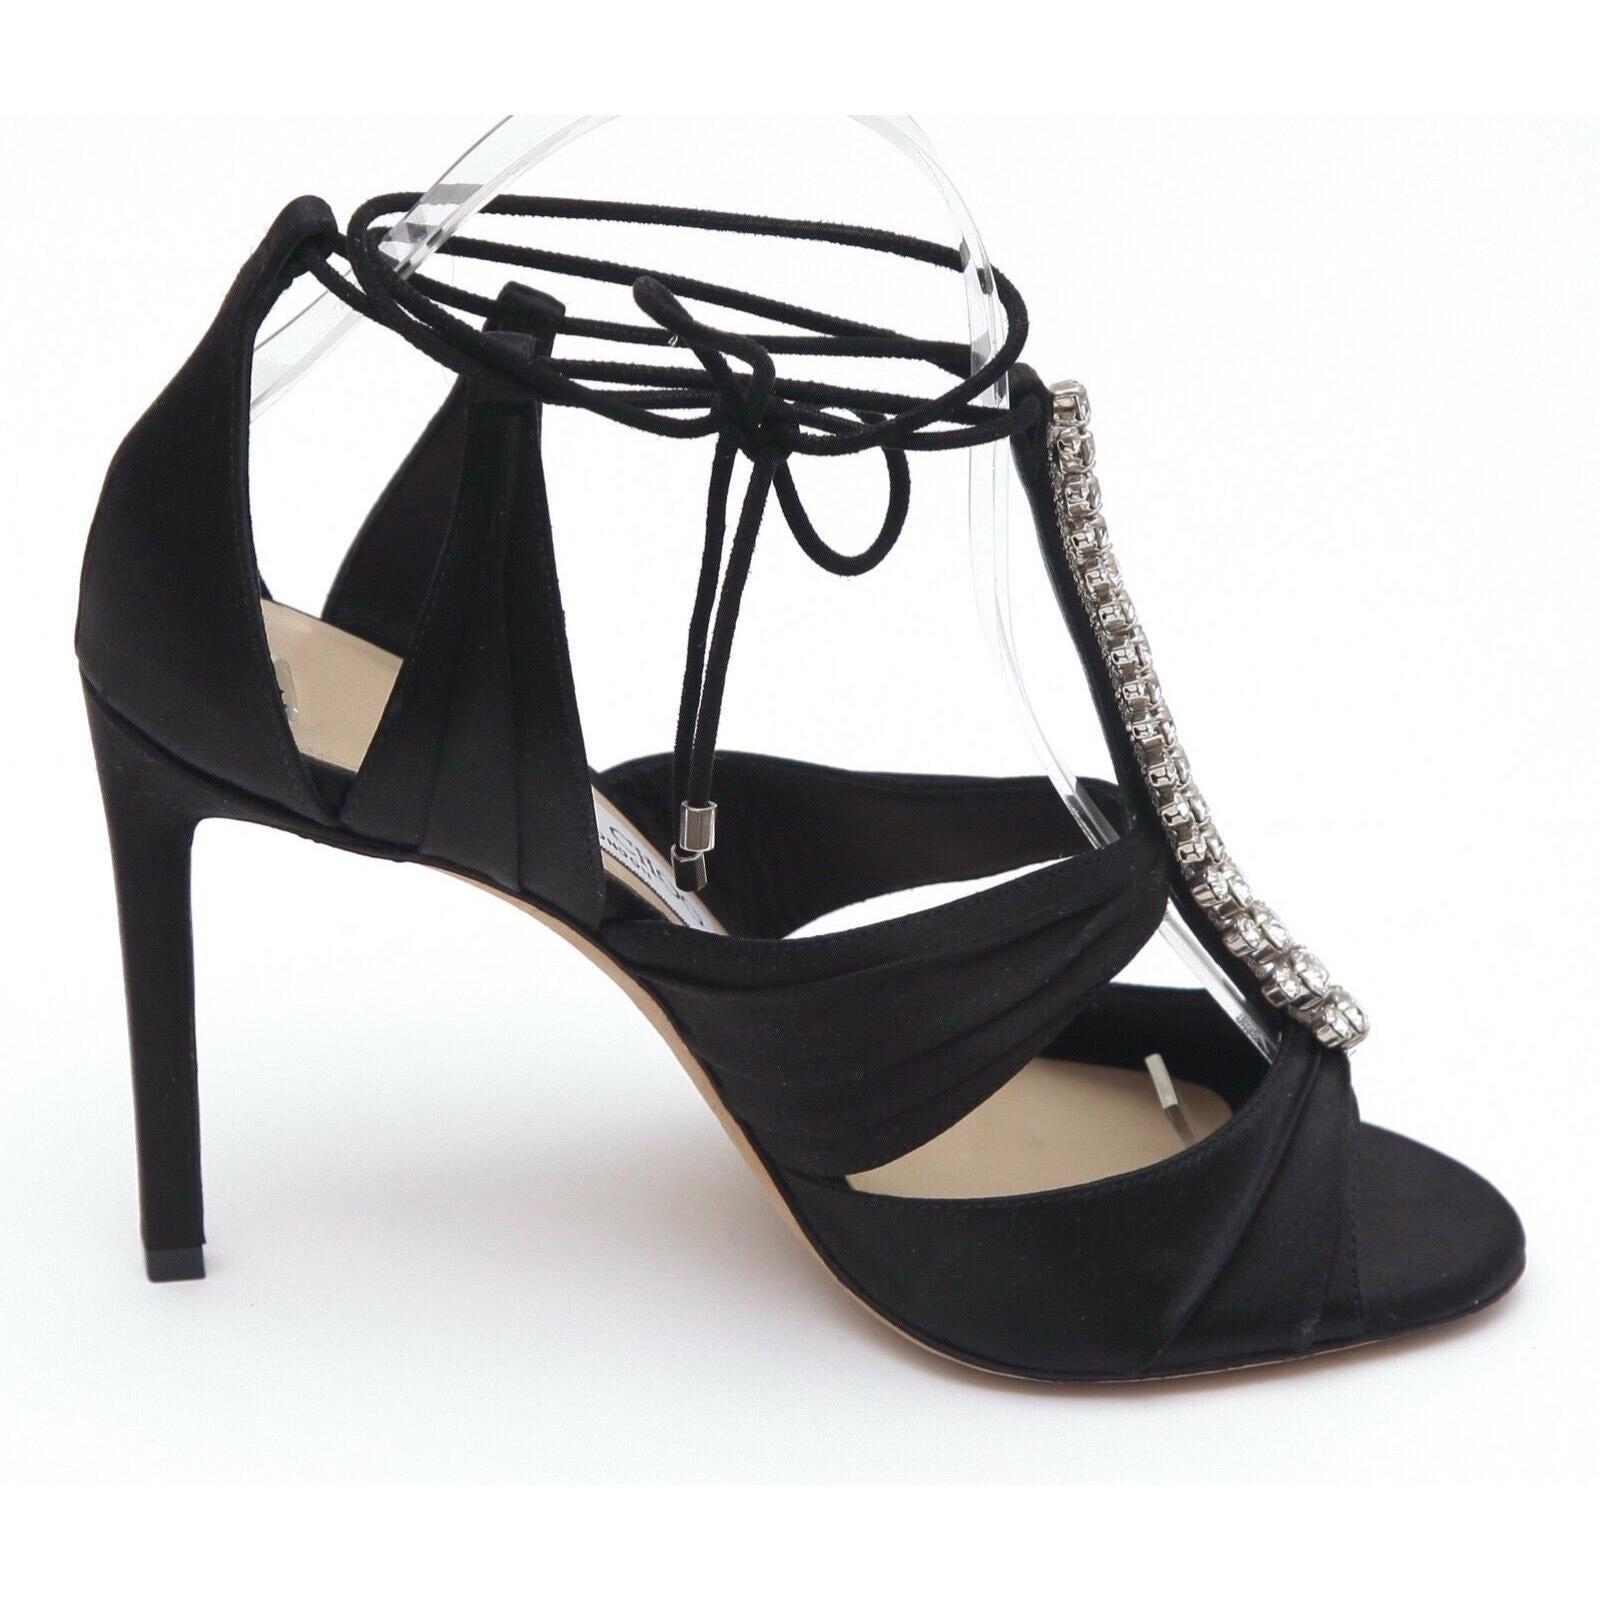 GUARANTEED AUTHENTIC JIMMY CHOO KENNY 100 BLACK SATIN CRYSTAL EMBELLISHED ANKLE TIE SANDALS

Retail excluding sales taxes $1,295

Details:
- Pleated black satin upper.
- Crystal embellished t-strap.
- Satin ankle tie strap closure.
- Leather insole